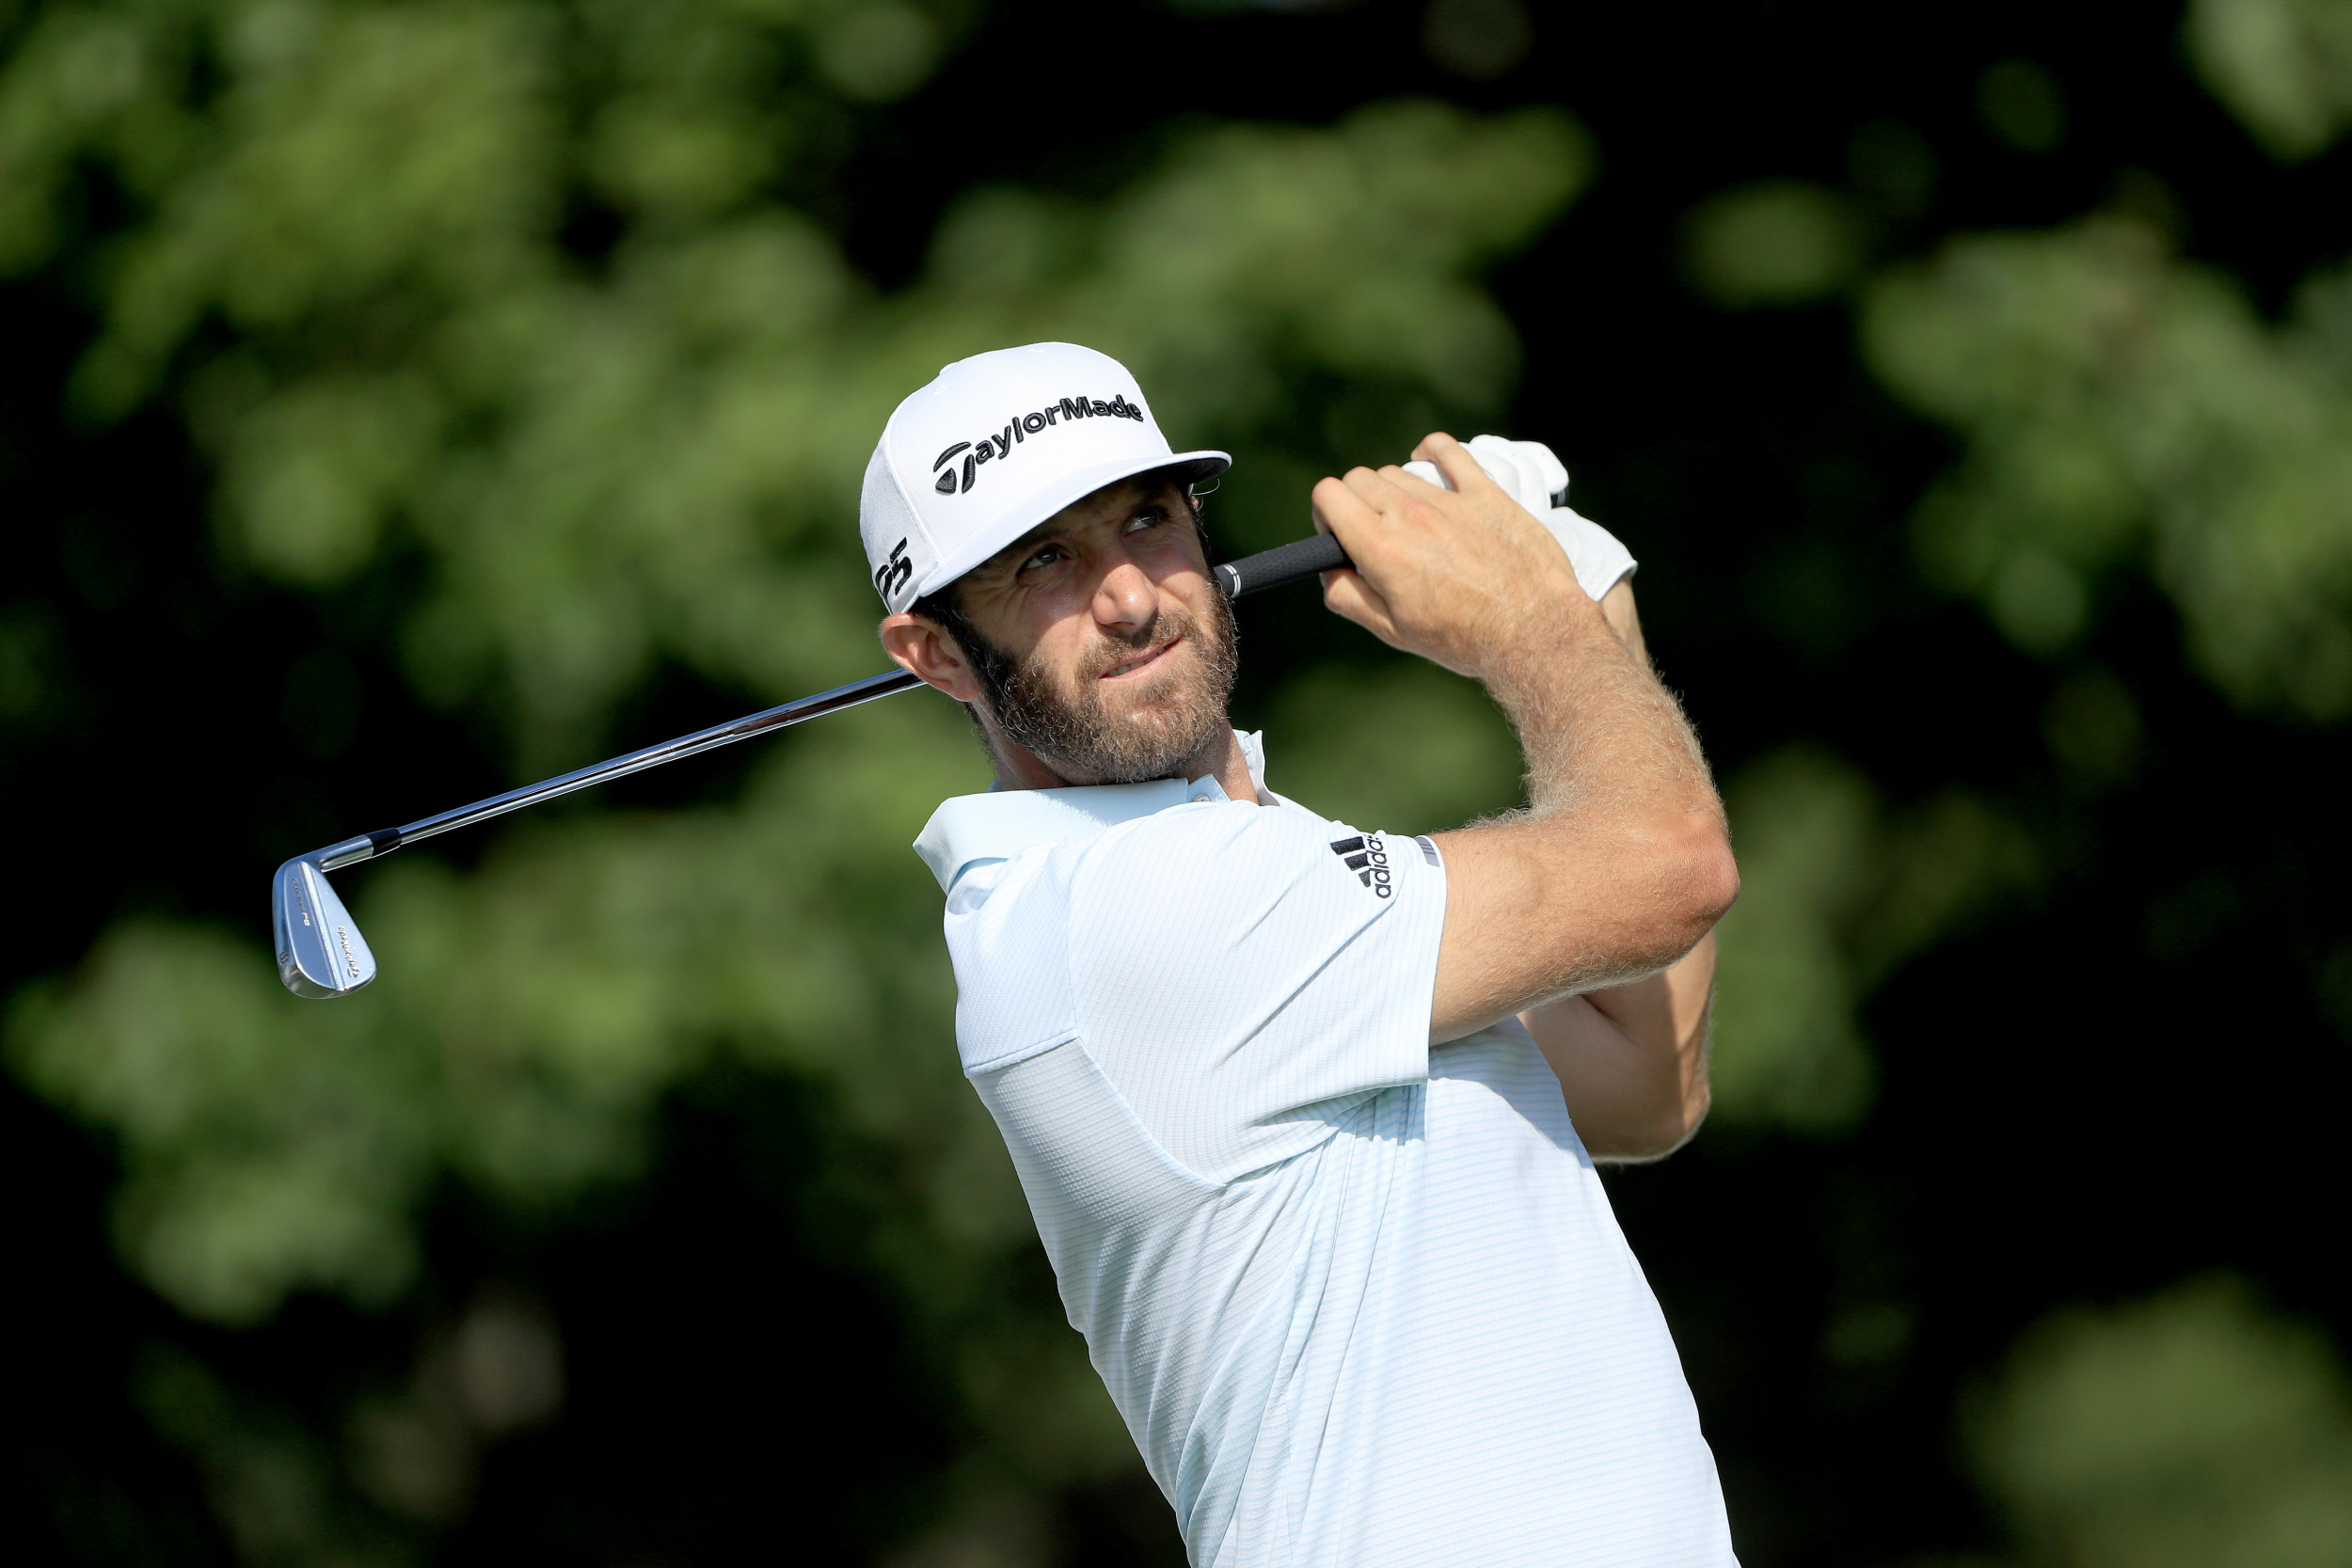 2020 Tour Championship How to Watch, Live Stream FedEx Cup Season Finale